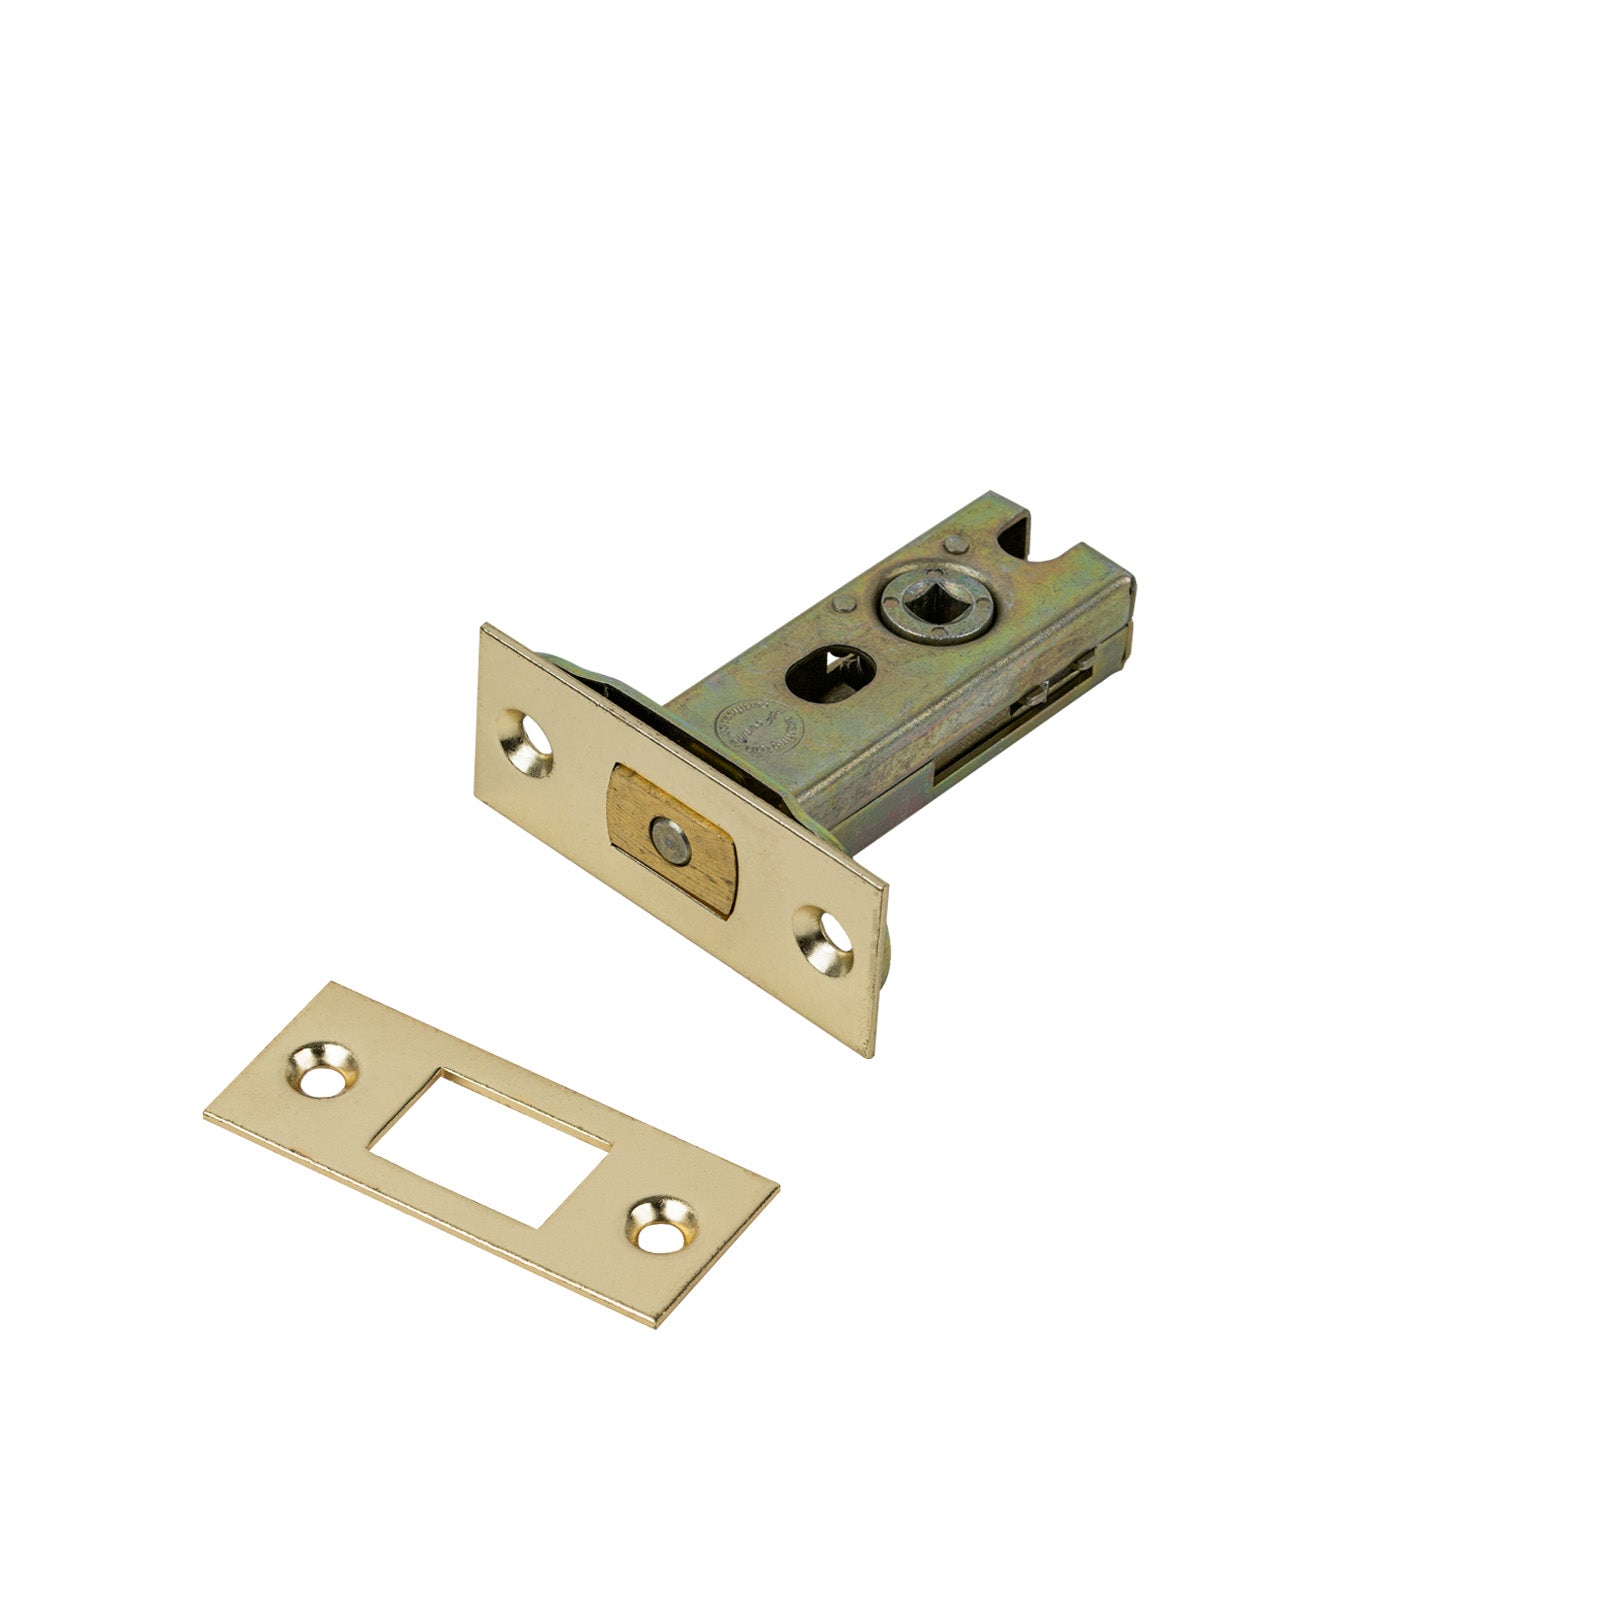 SHOW Bathroom Deadbolt - 2.5 Inch with Polished brass finished forend and striker plate